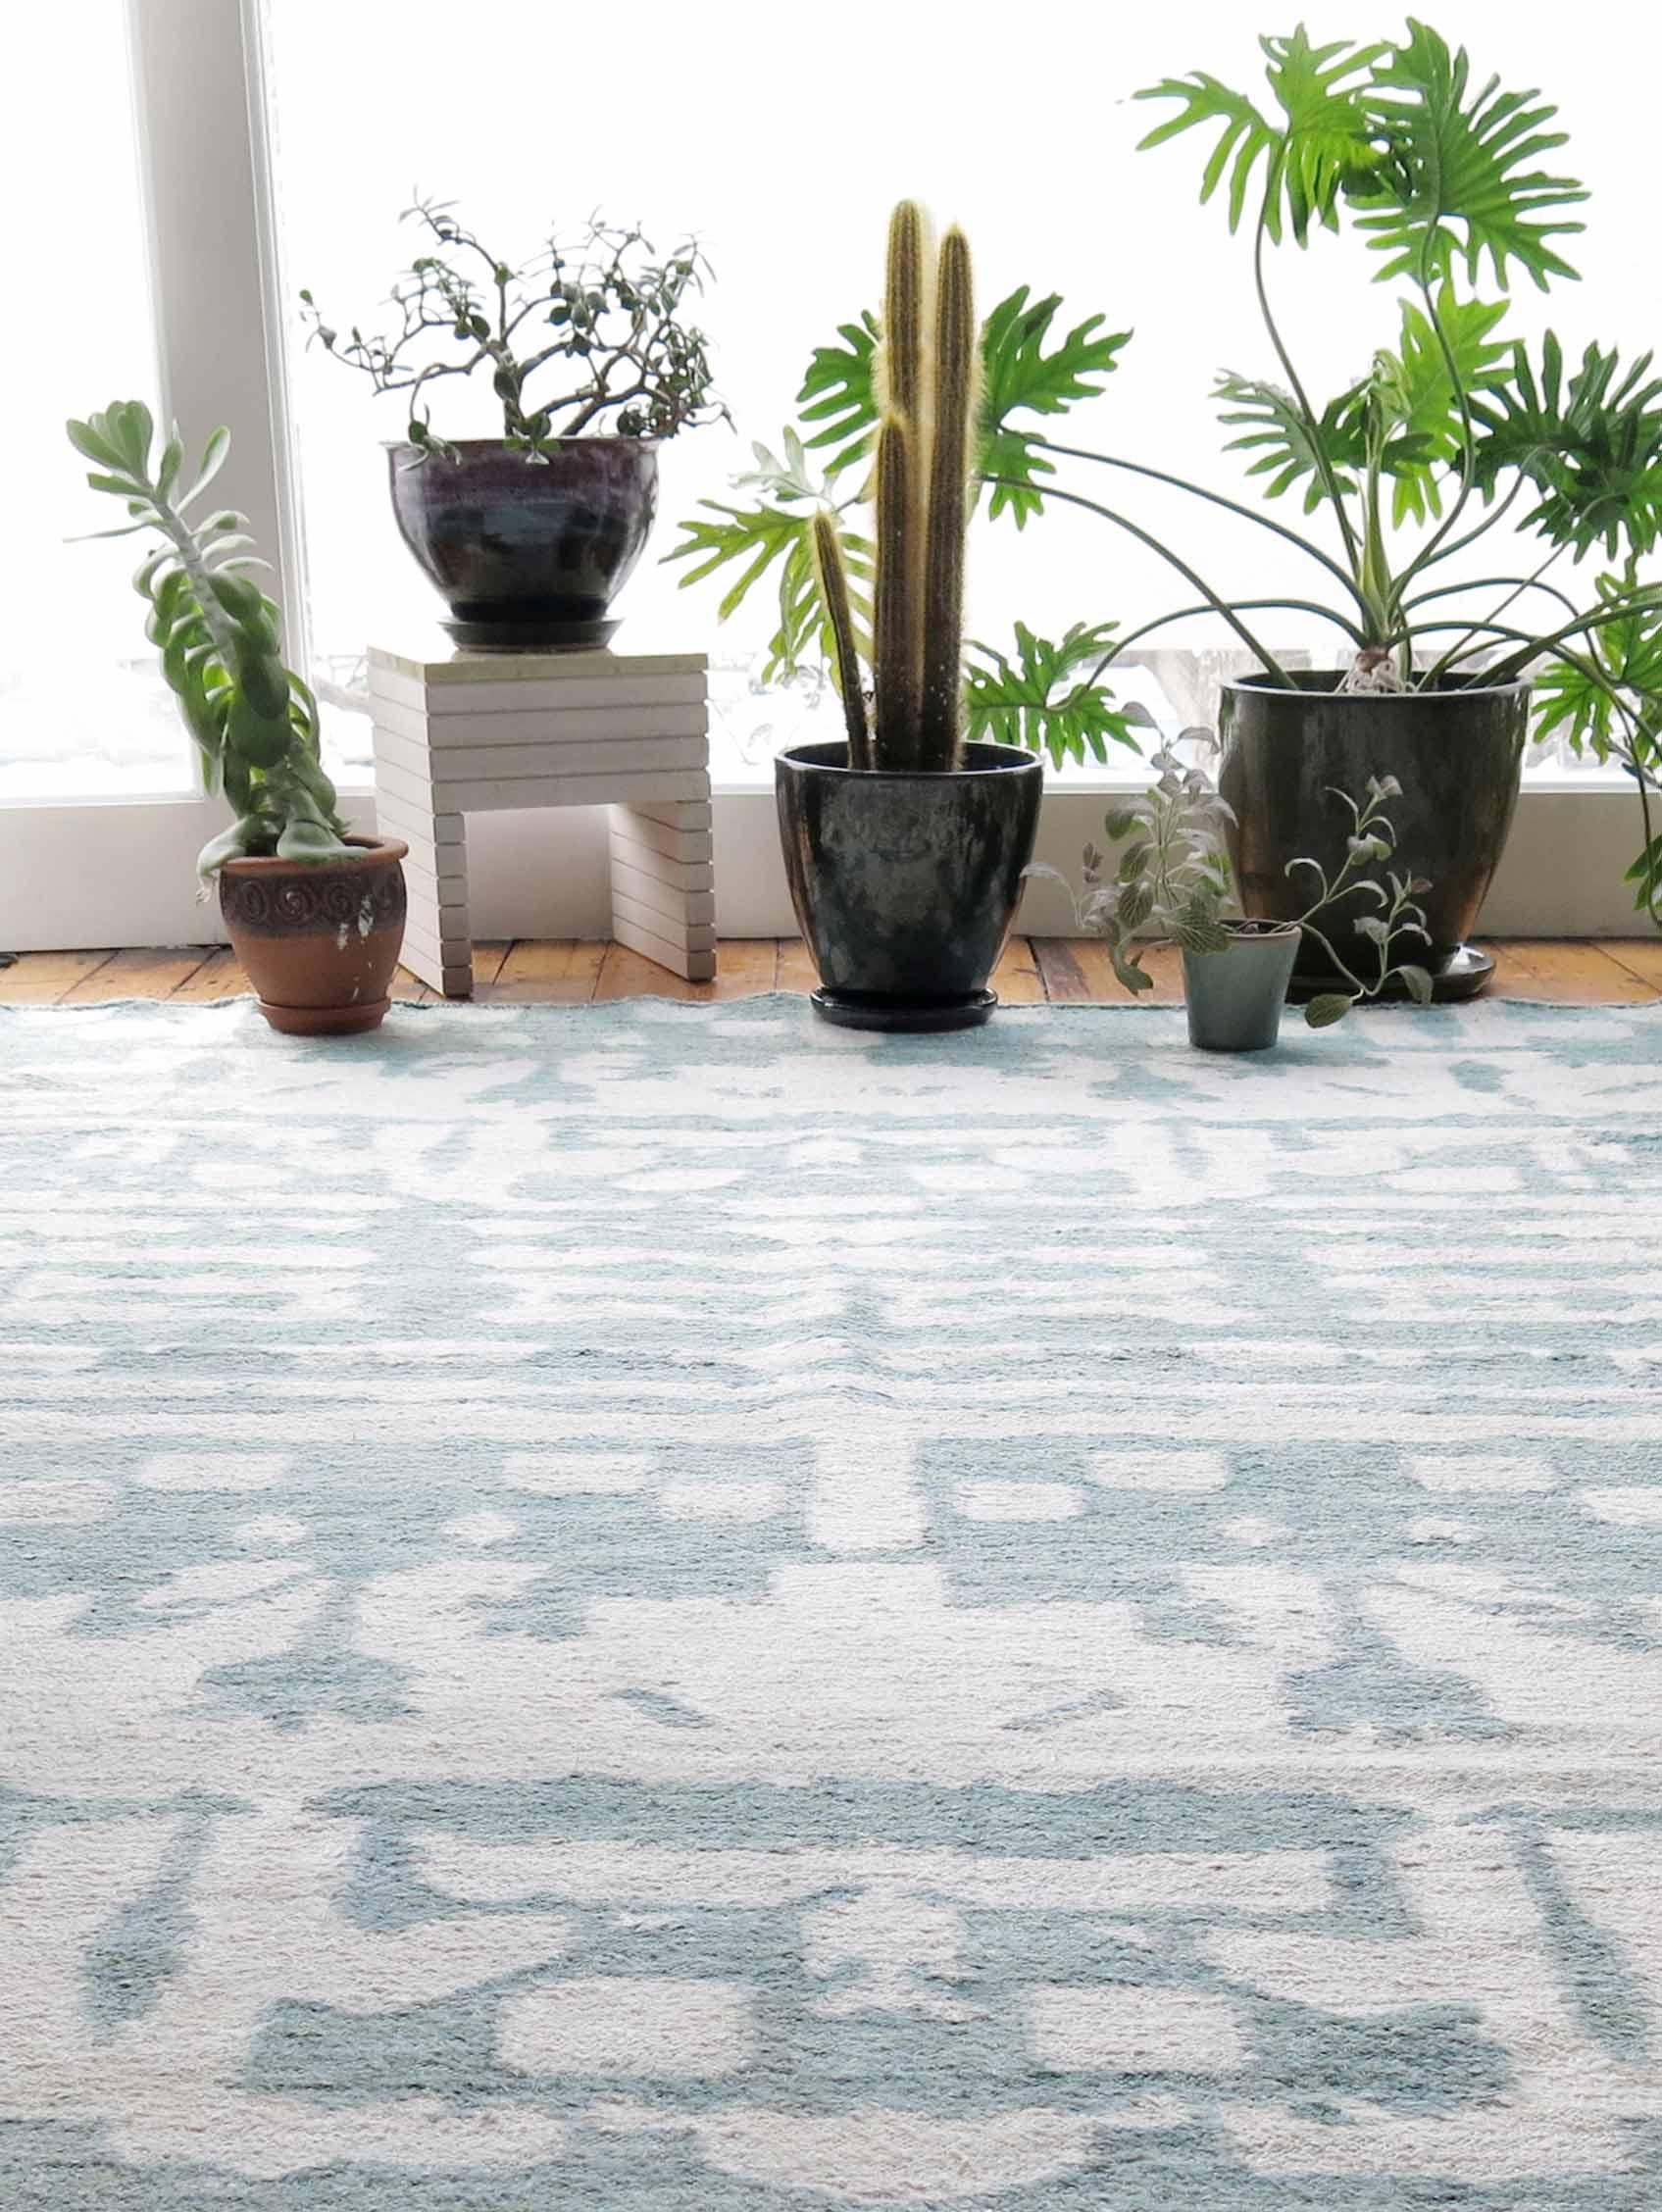 Rug Pattern: Banda - Chloros
Material: Bamboo Silk Design/New Zealand Wool Background
Quality: Flat-weave, handwoven 
Size: 6'-0